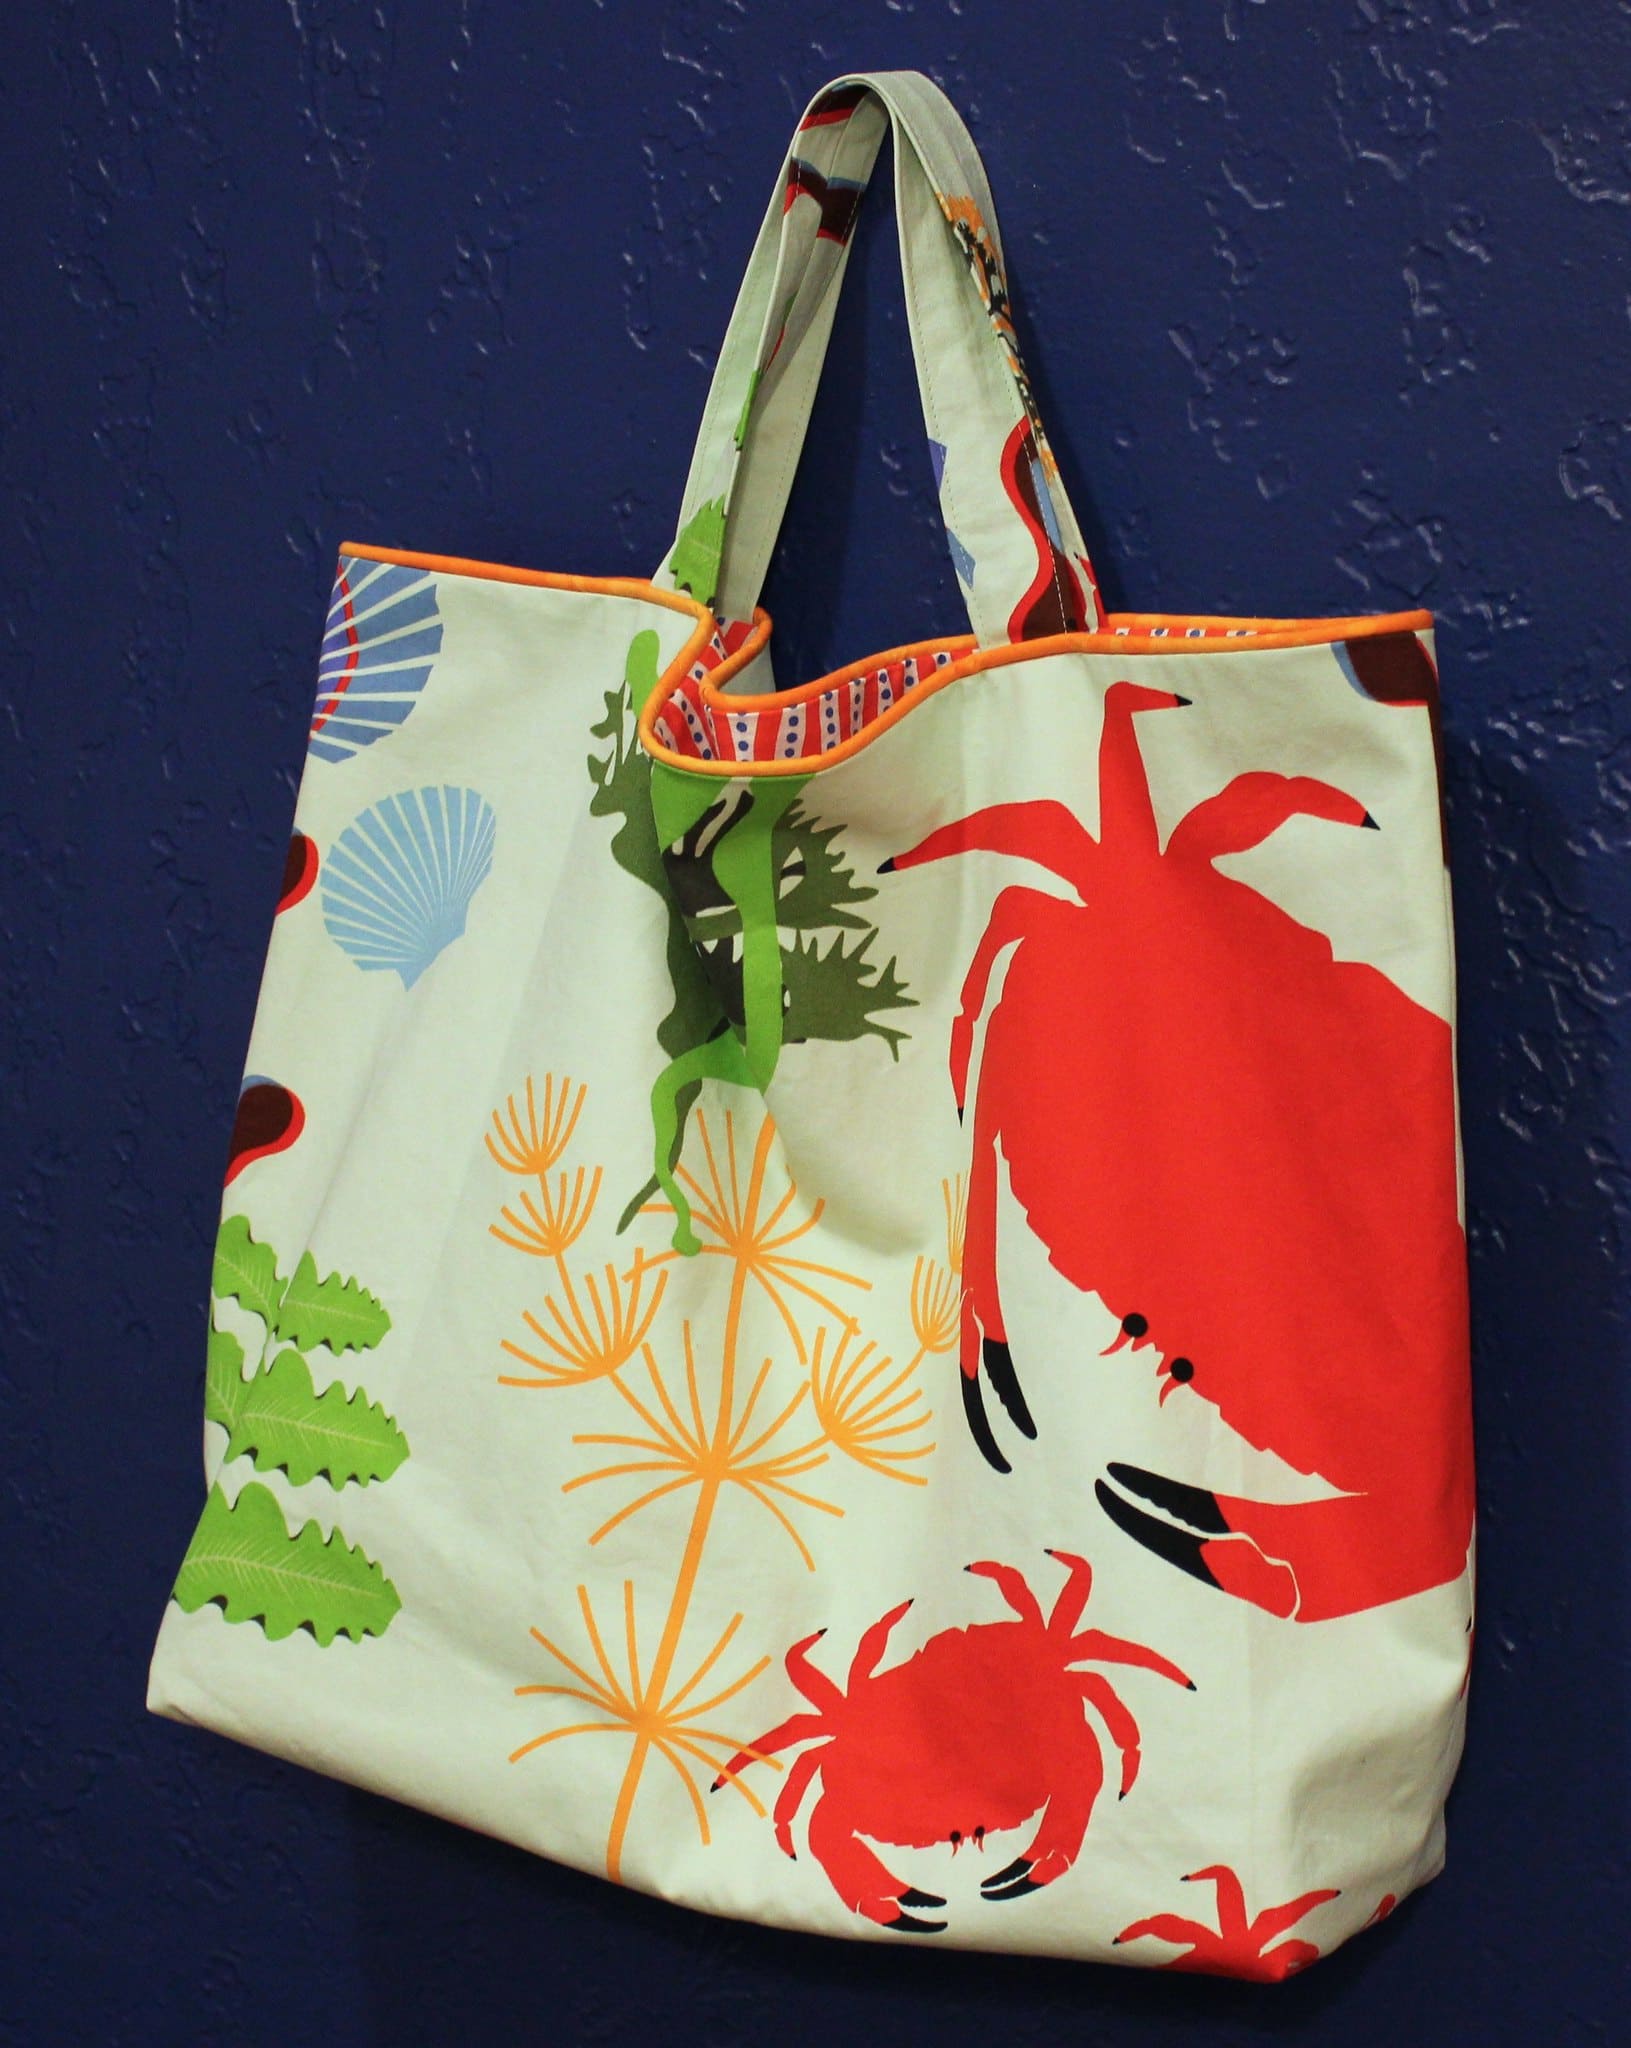 DIY Rock the Tote: rightsizing